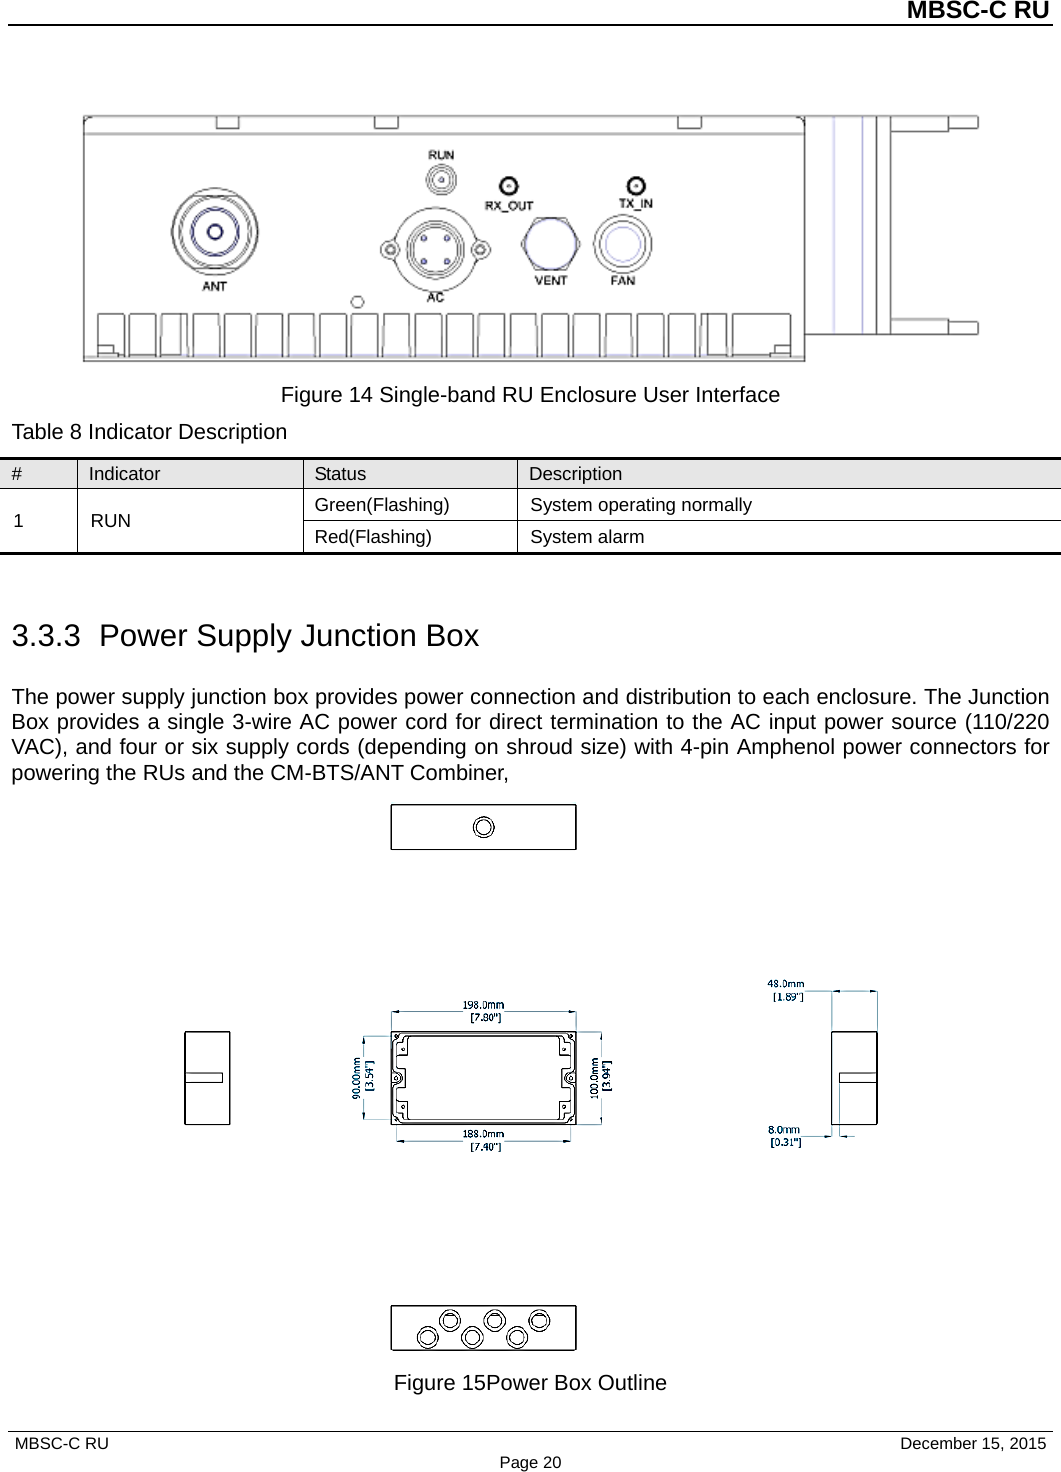 MBSC-C RU MBSC-C RU   December 15, 2015 Page 20Figure 14 Single-band RU Enclosure User Interface Table 8 Indicator Description #  Indicator Status Description 1  RUN Green(Flashing)  System operating normally Red(Flashing)  System alarm 3.3.3 Power Supply Junction Box The power supply junction box provides power connection and distribution to each enclosure. The Junction Box provides a single 3-wire AC power cord for direct termination to the AC input power source (110/220 VAC), and four or six supply cords (depending on shroud size) with 4-pin Amphenol power connectors for powering the RUs and the CM-BTS/ANT Combiner, Figure 15Power Box Outline 